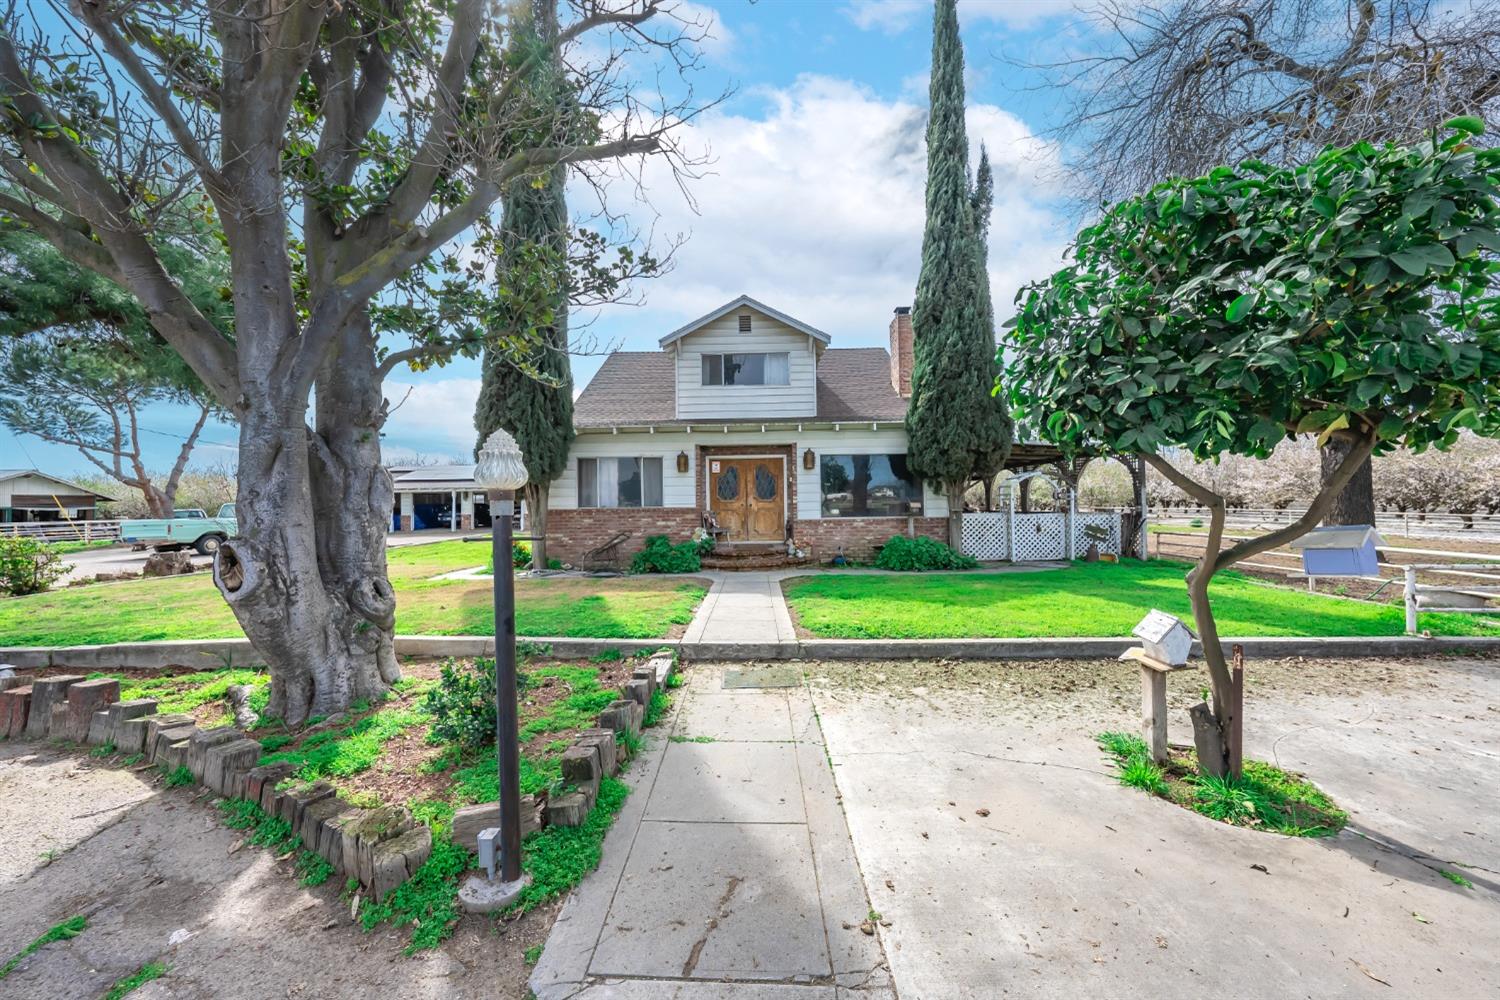 Photo of 13379 18th Ave in Lemoore, CA